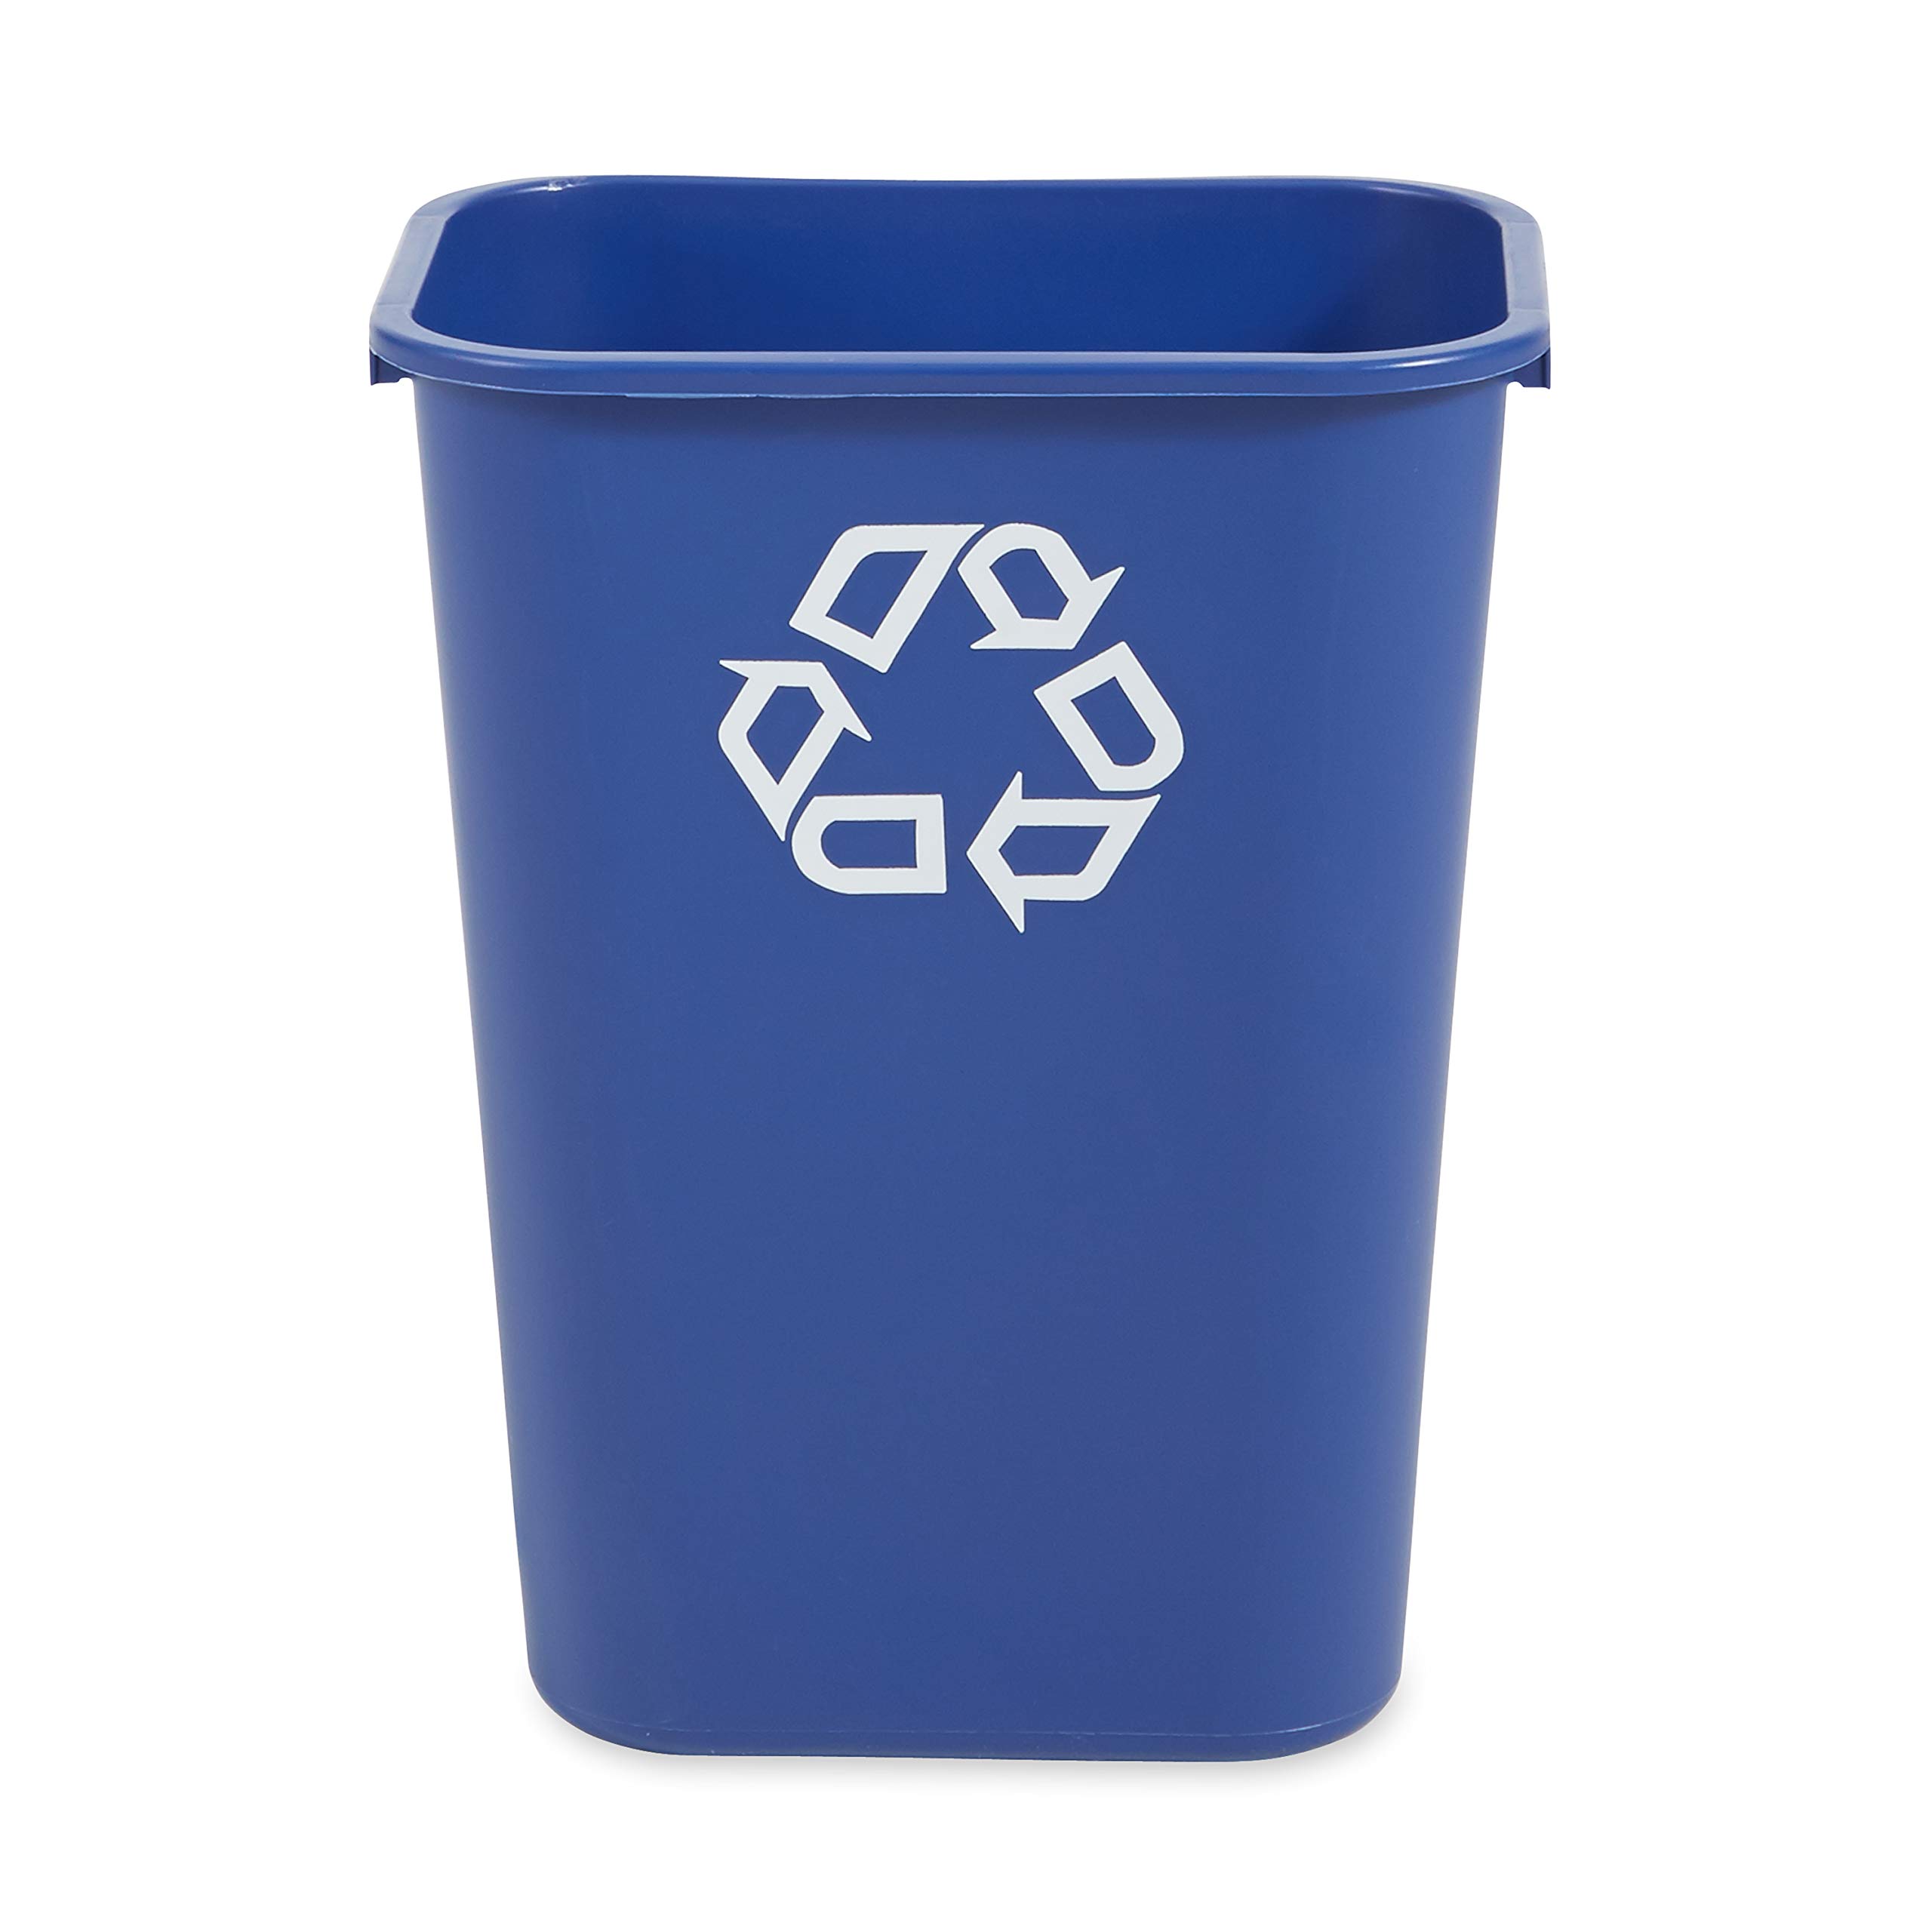 Book Cover Rubbermaid Commercial Products Wastebasket Deskside Recycling Can Large 41 Qt/10.25 GAL, for Home/Office/Under Desk, Blue (FG295773BLUE) 10 Gallons Blue 1